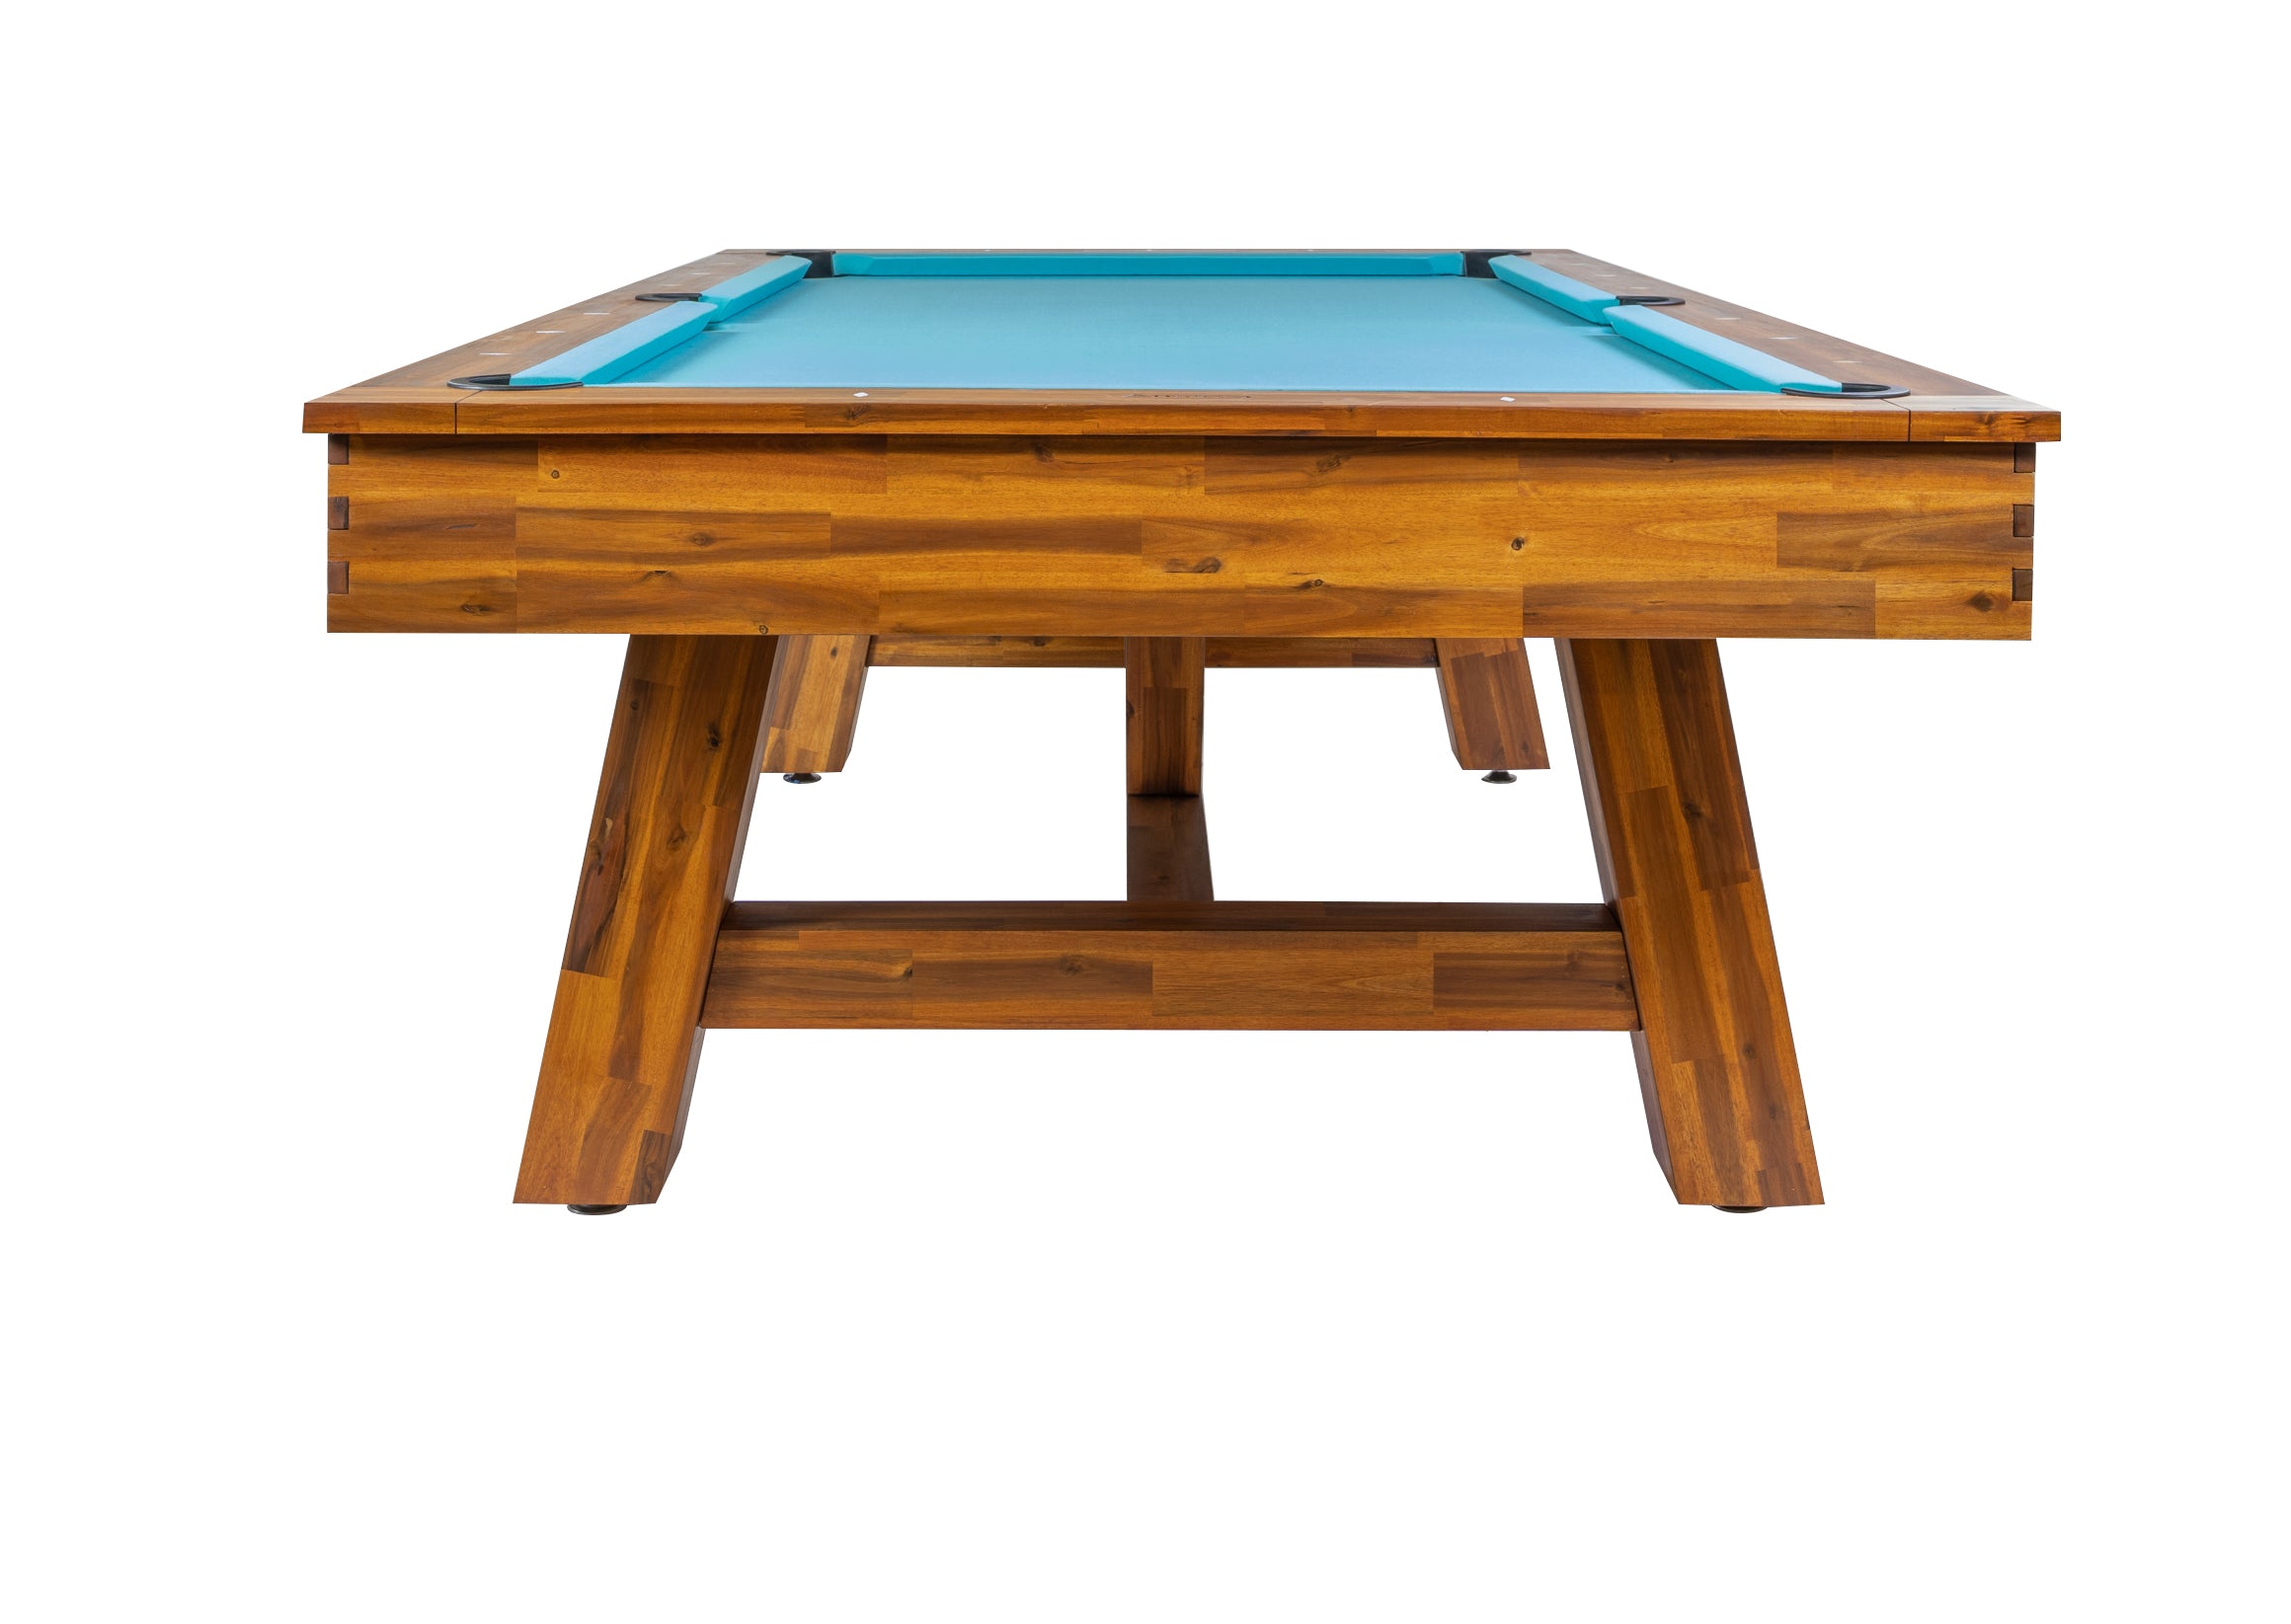 Legacy Billiards Emory 8 Ft Outdoor Pool Table in Natural Acacia Finish with Pool Aqua Cloth End View